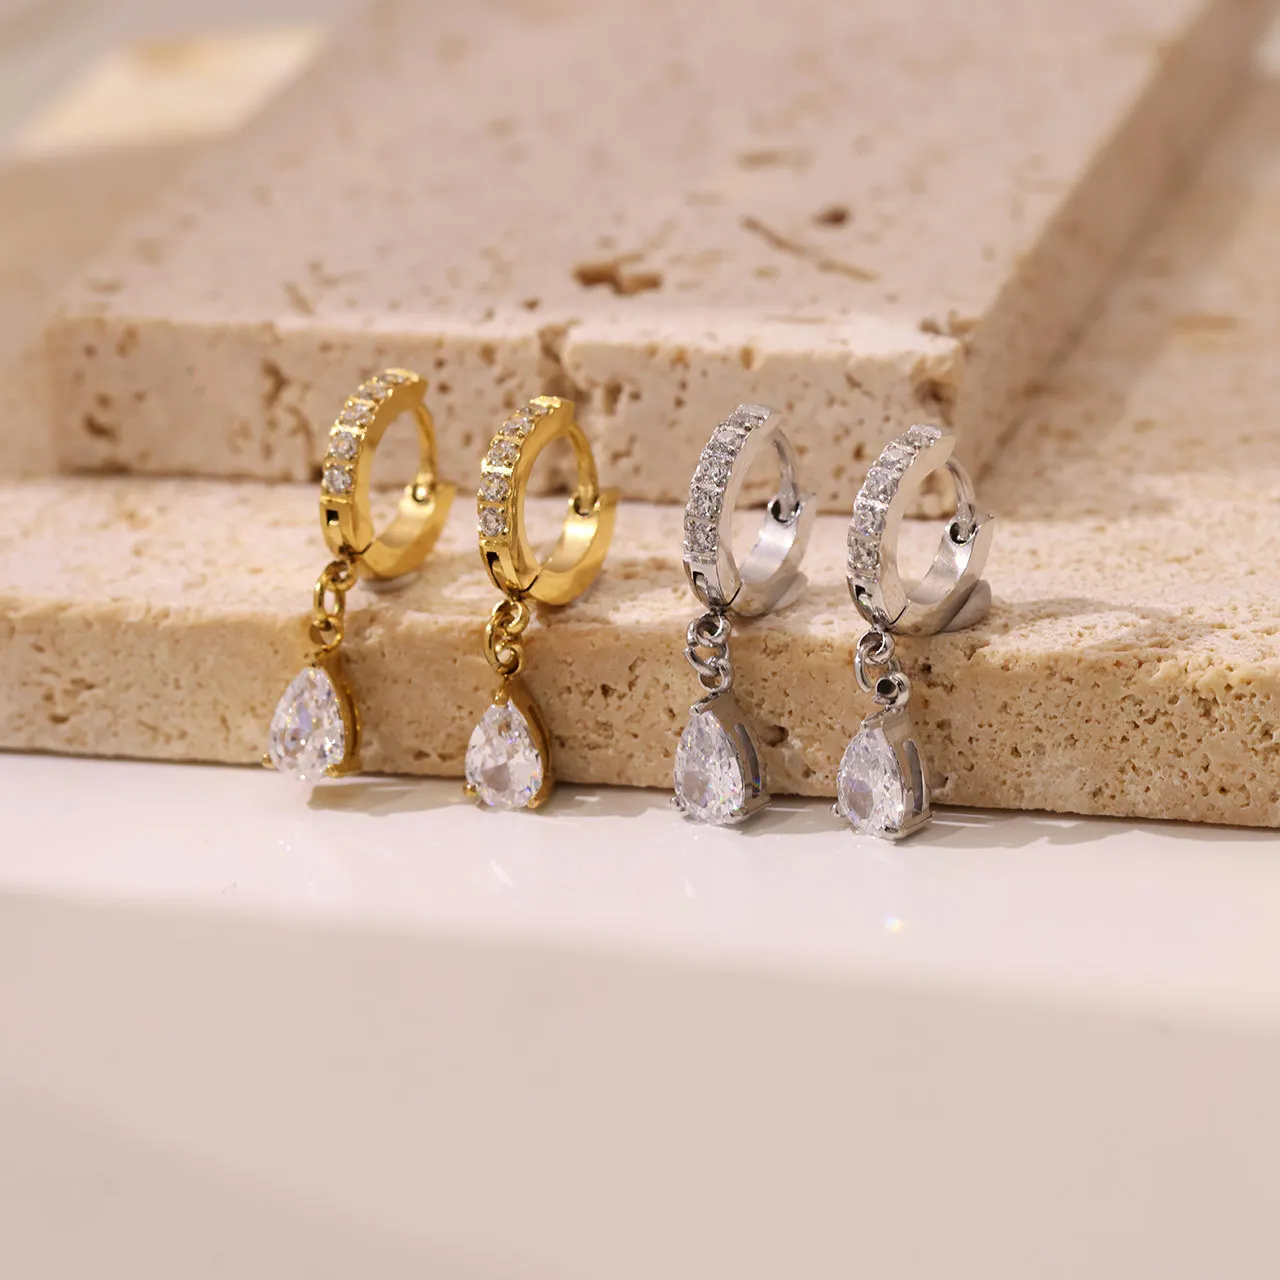 

Unique Stainless Steel Pendant Earrings Dangling Gold Plated CZ Mirco Pave Charms Zircon Hoop Earrings For Women Jewelry Gift